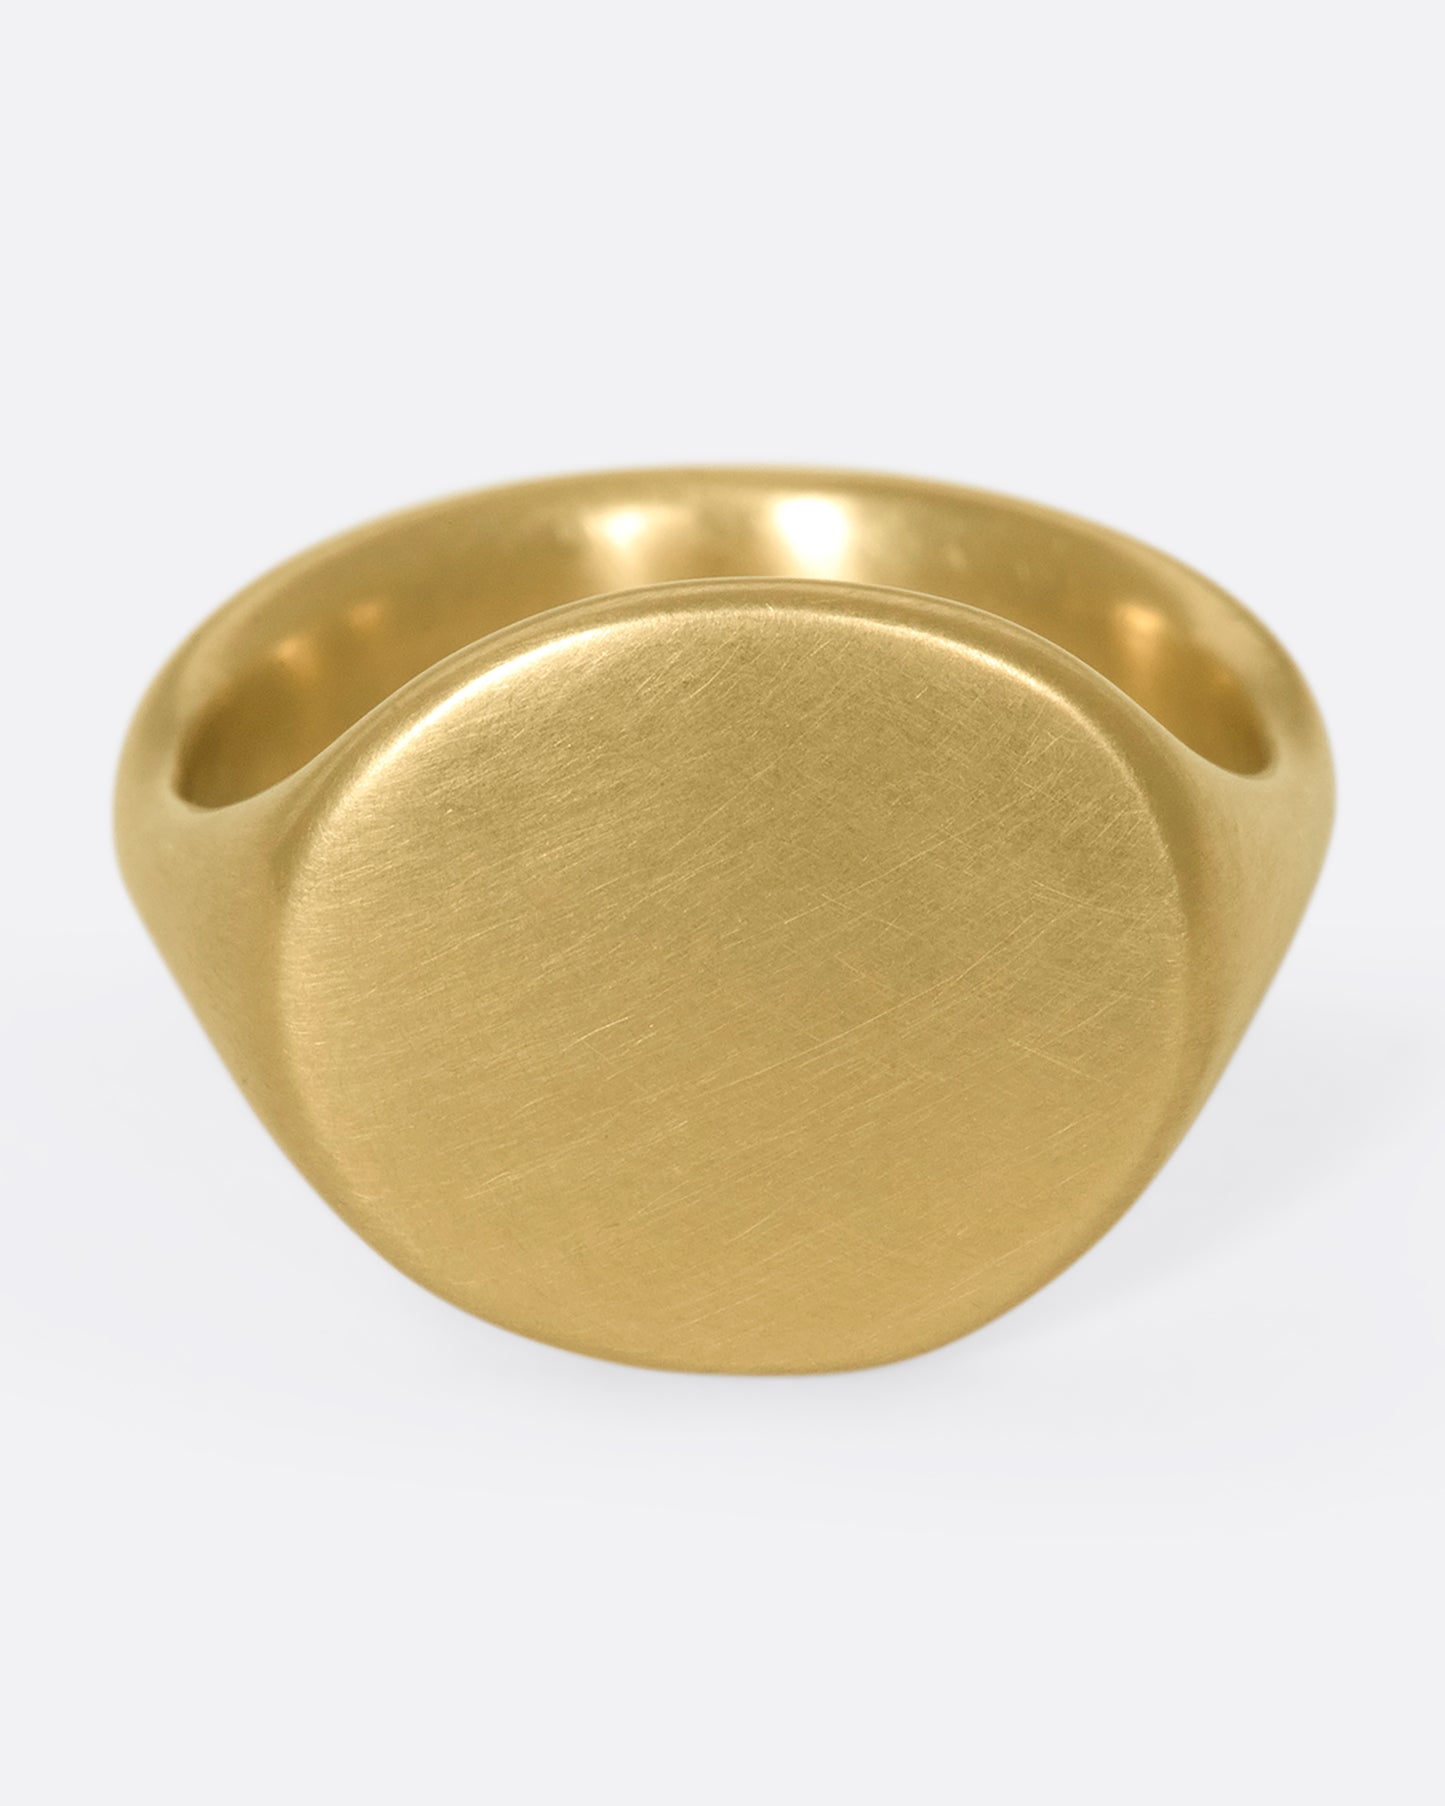 This solid 14k gold oval signet ring is incredibly soft and comfortable. The band is perfectly weighted, so the signet never falls to the side.